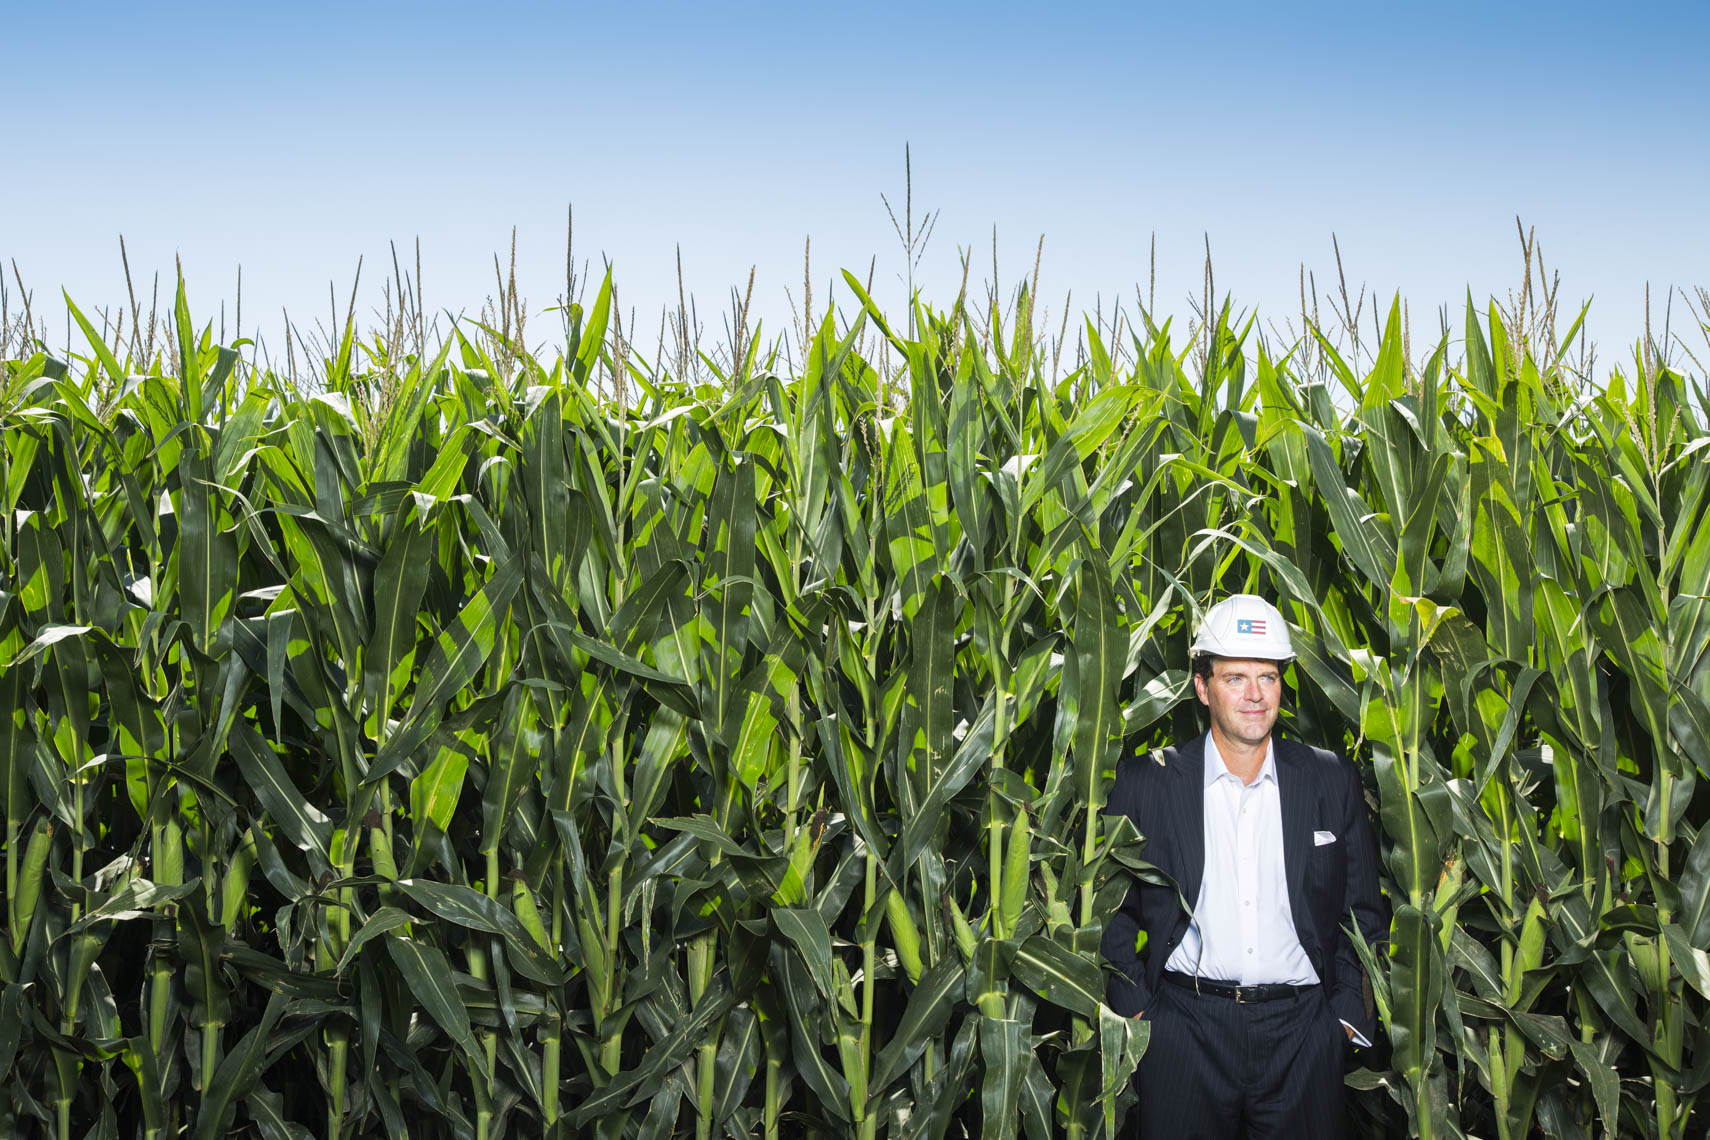 Environmental portrait of Hugh Welsh, General Counsel & President of Royal DSM North America taken at the Project Liberty ethanol production site in Emmetsburg, Iowa